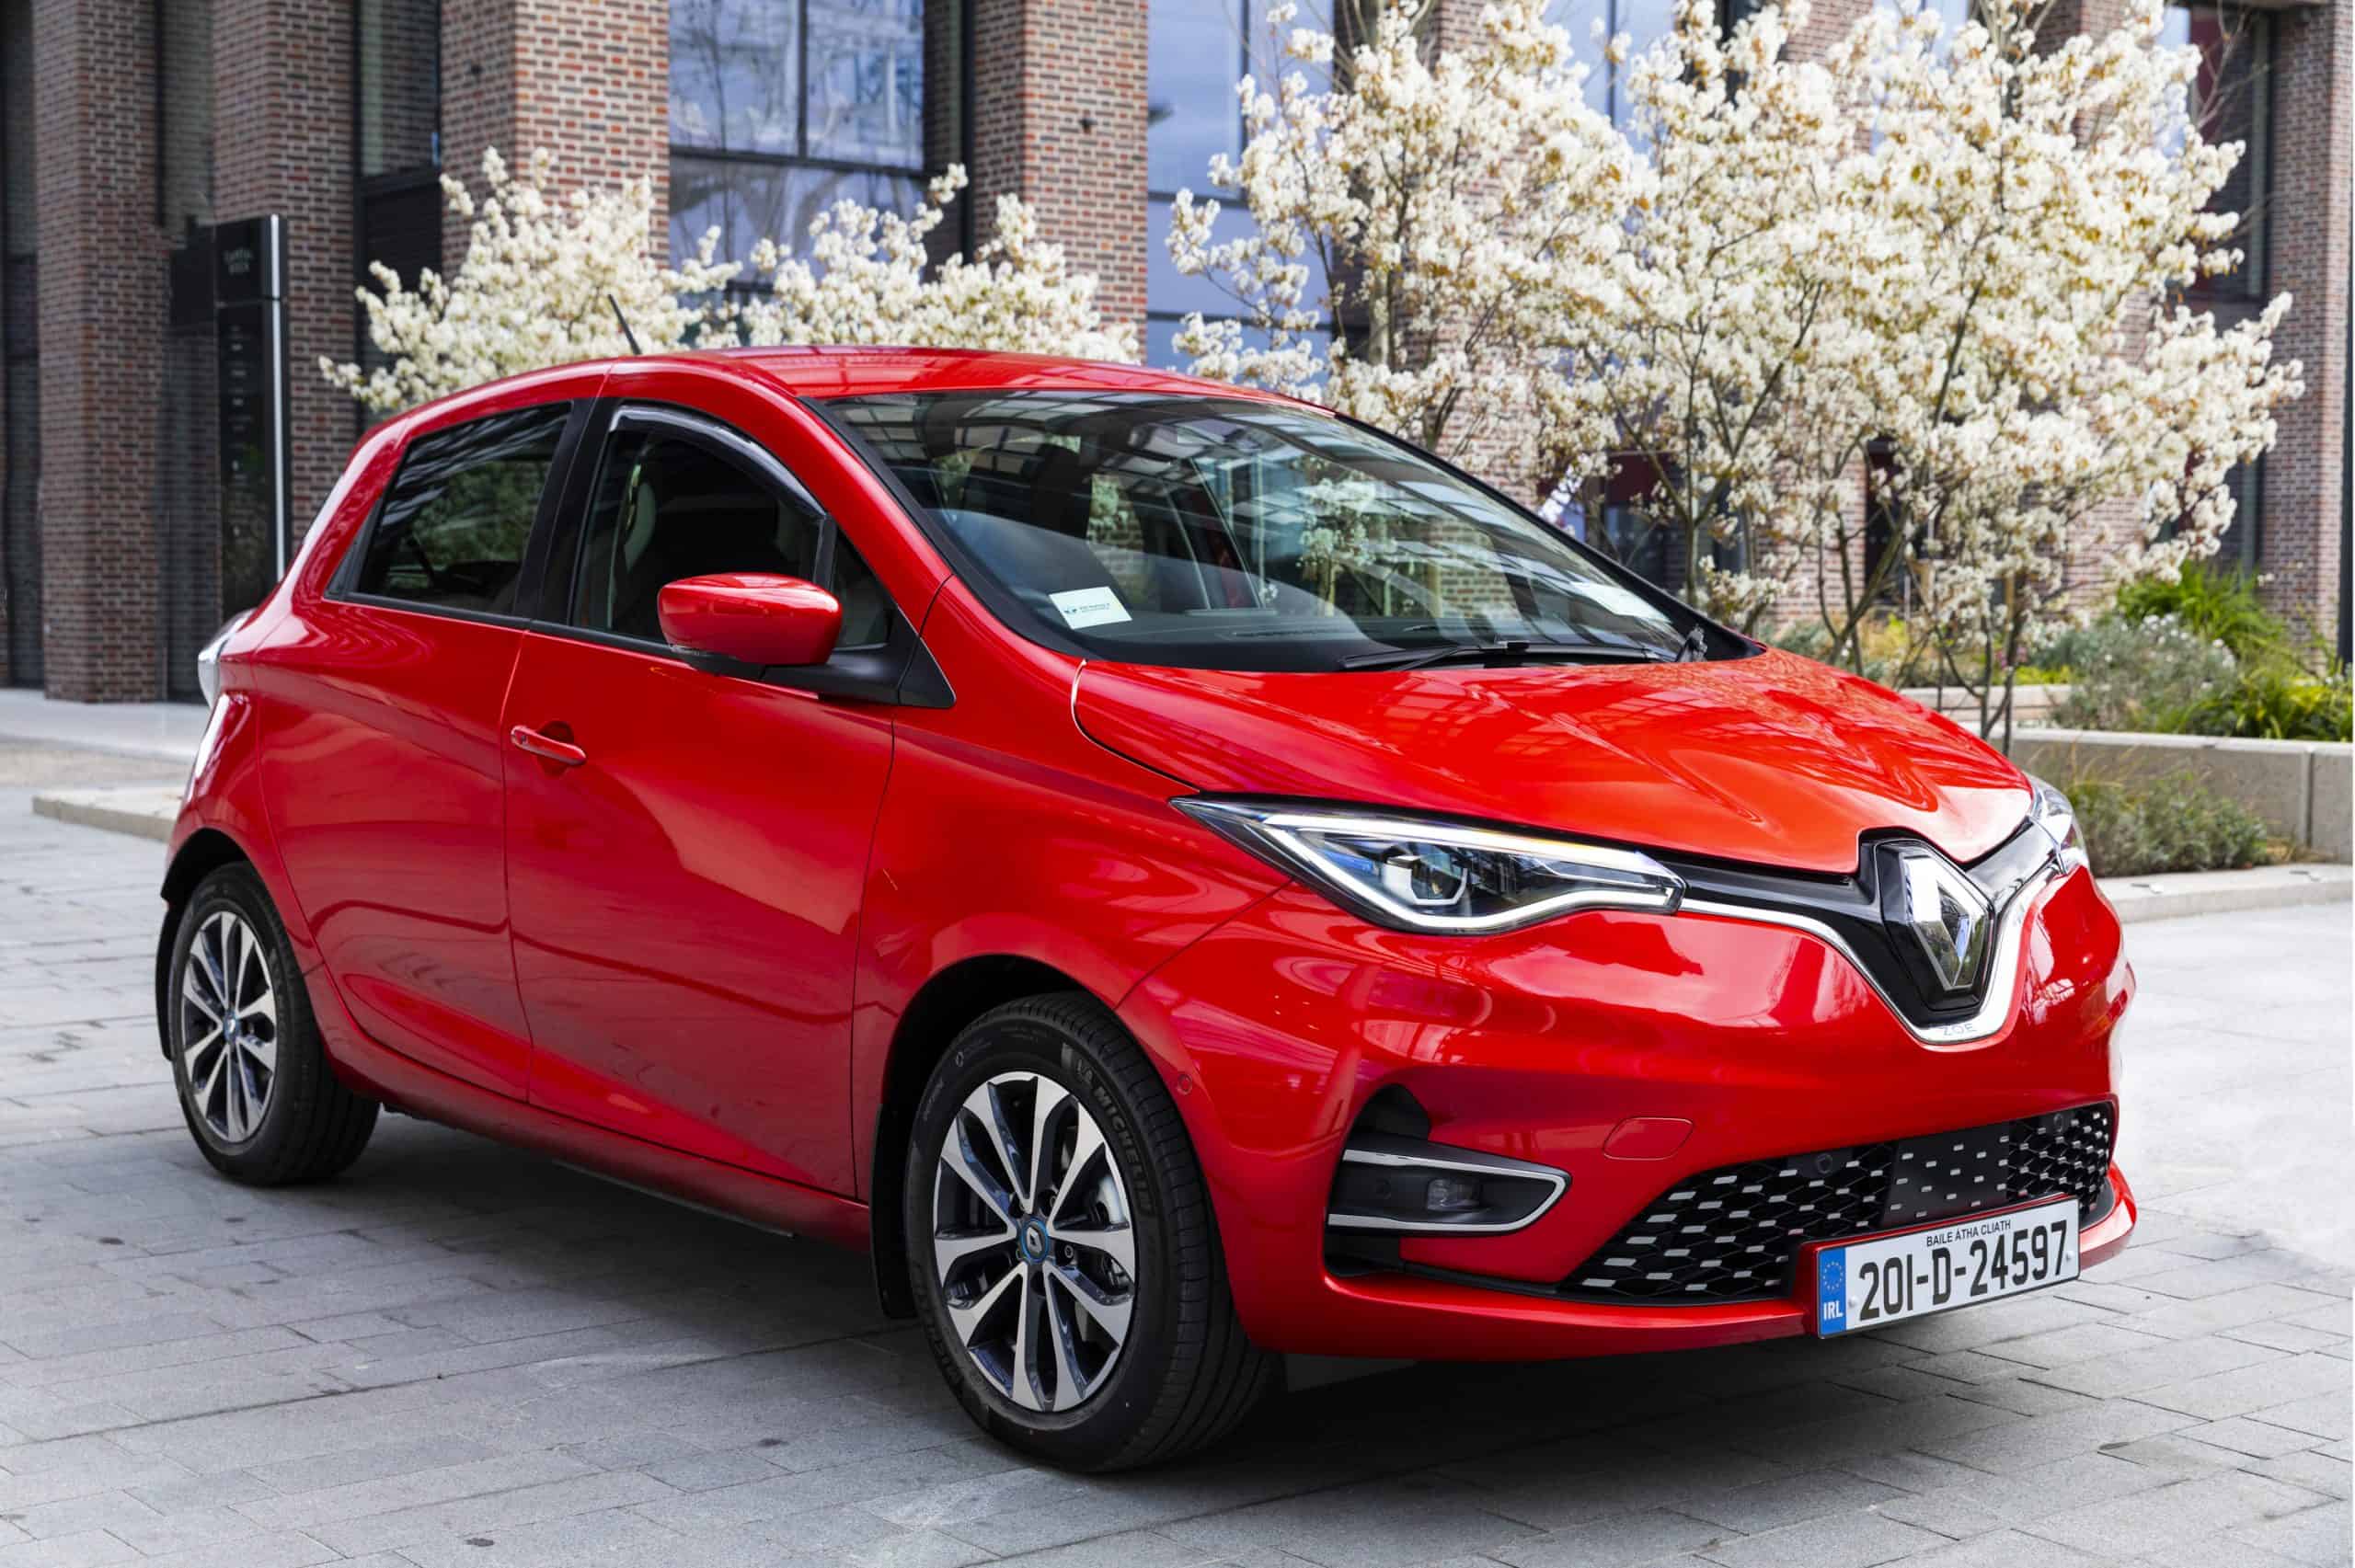 Renault ZOE is Ireland's BestSelling Electric Car for July 2020